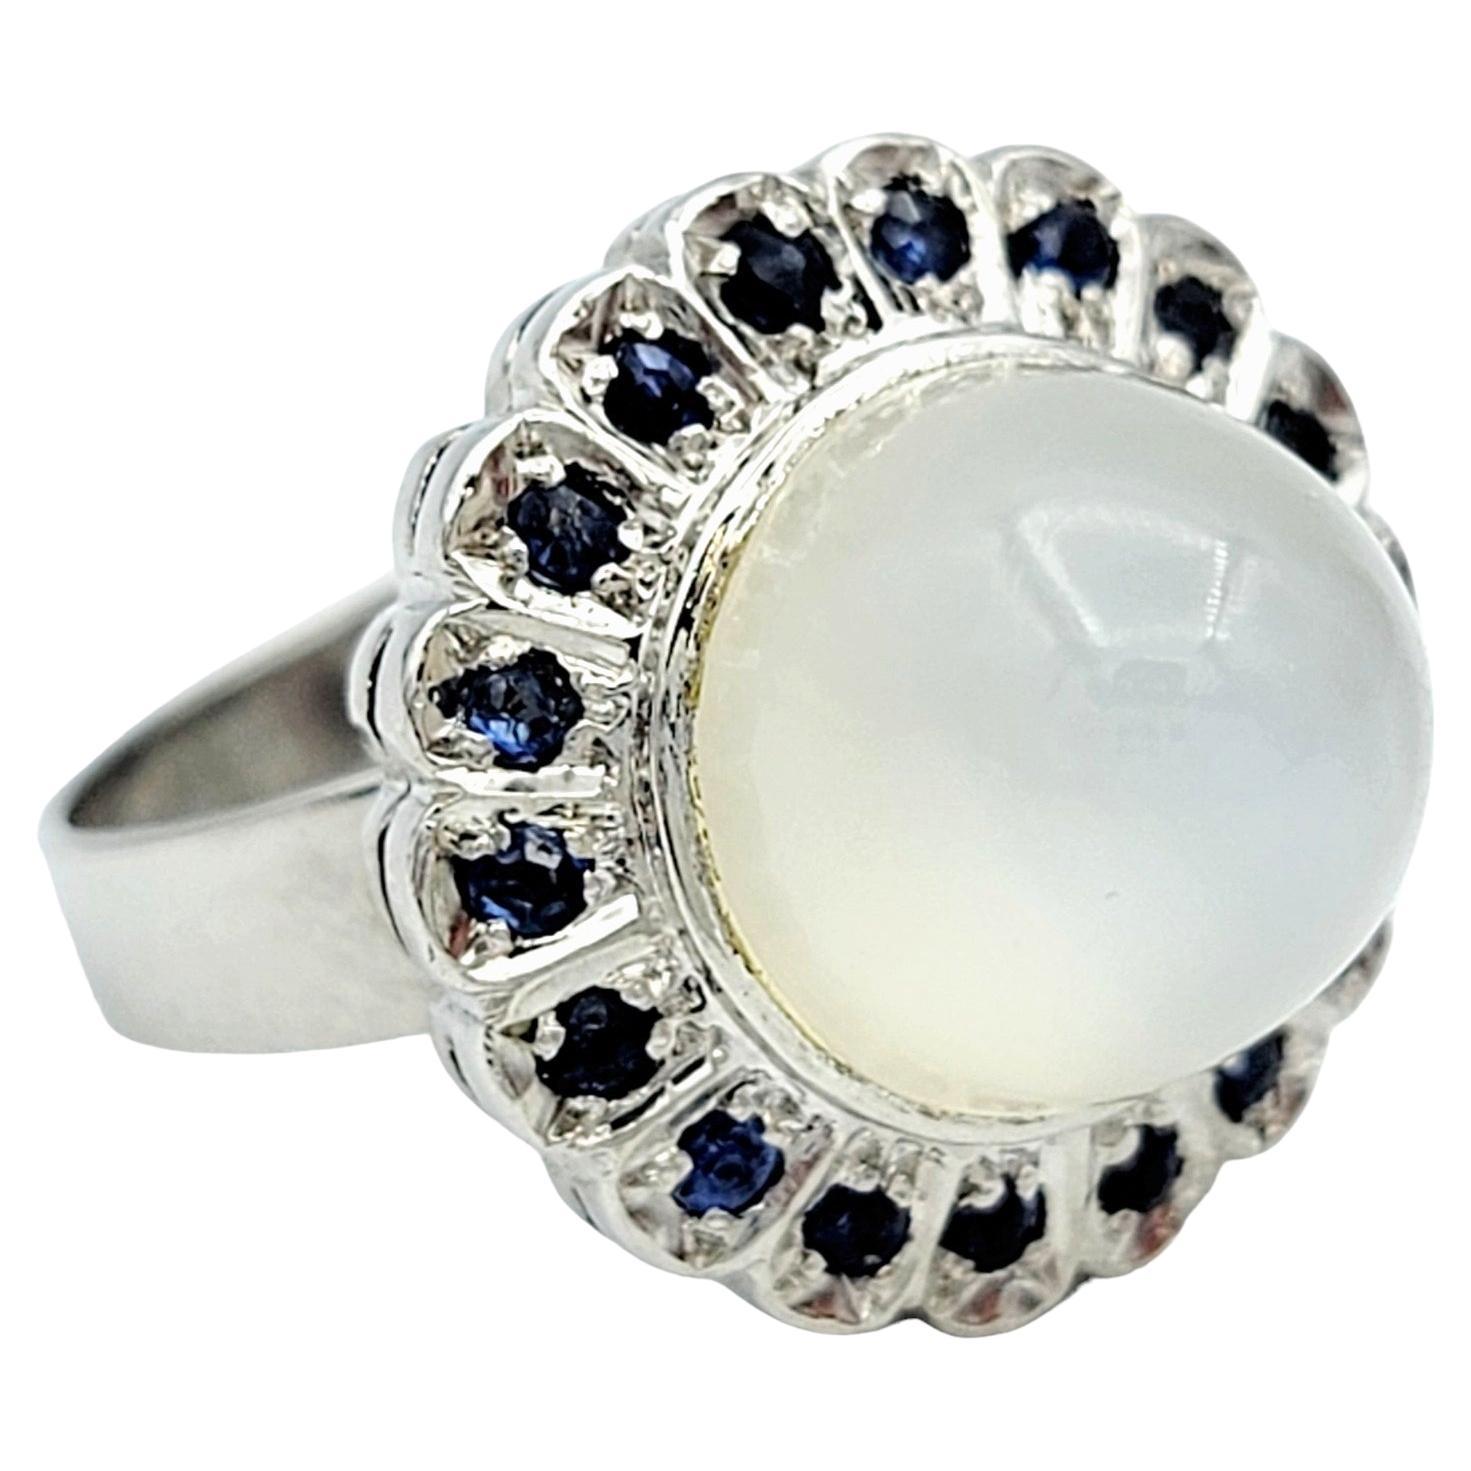 Cabochon Moonstone Domed Cocktail Ring with Sapphire Halo in 10 Karat White Gold